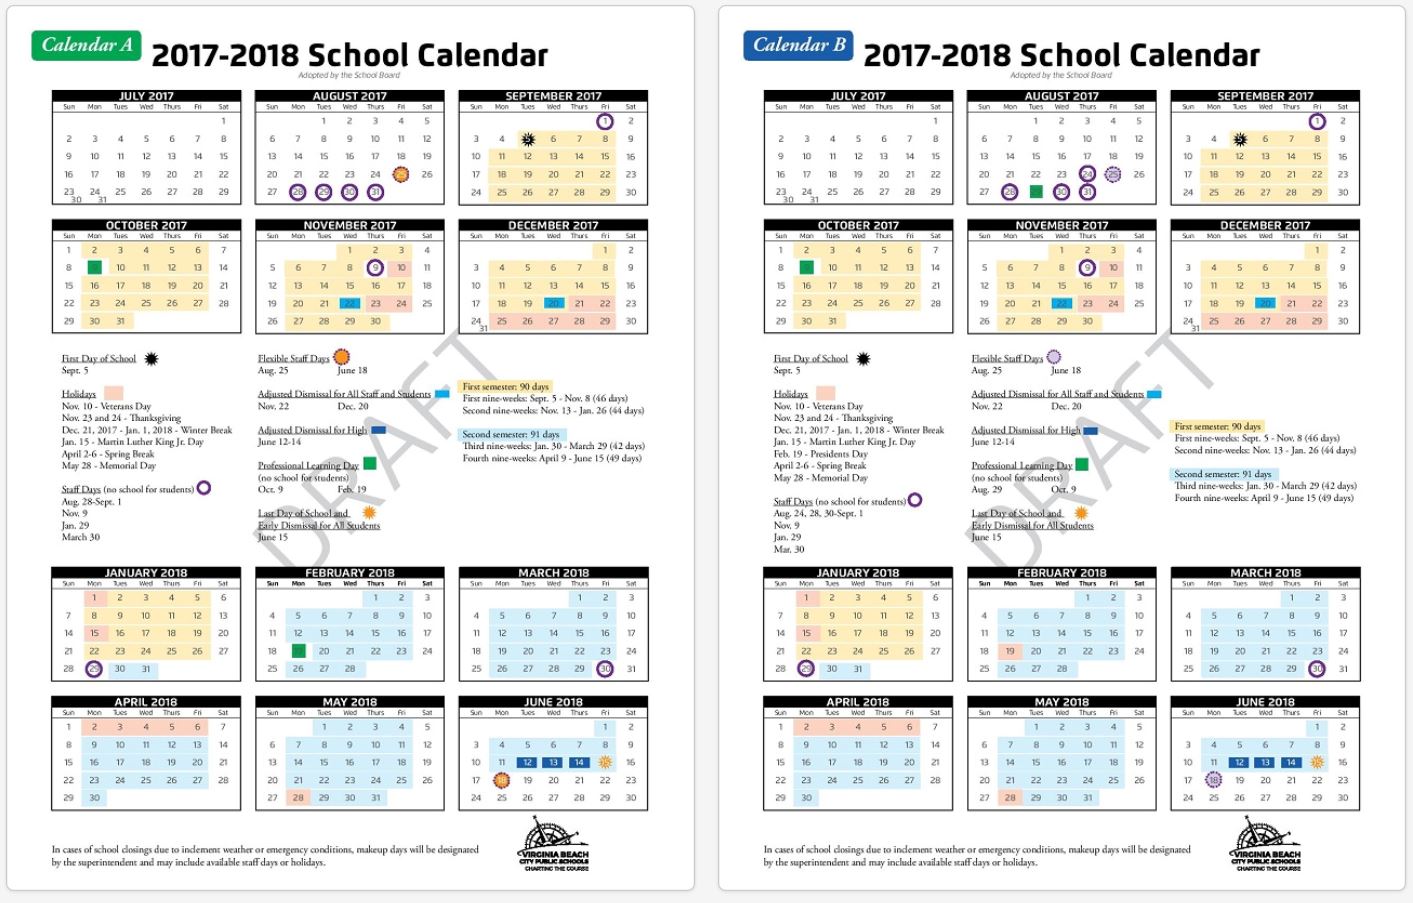 2017 18 school year calendar options available for review Kaleidoscope